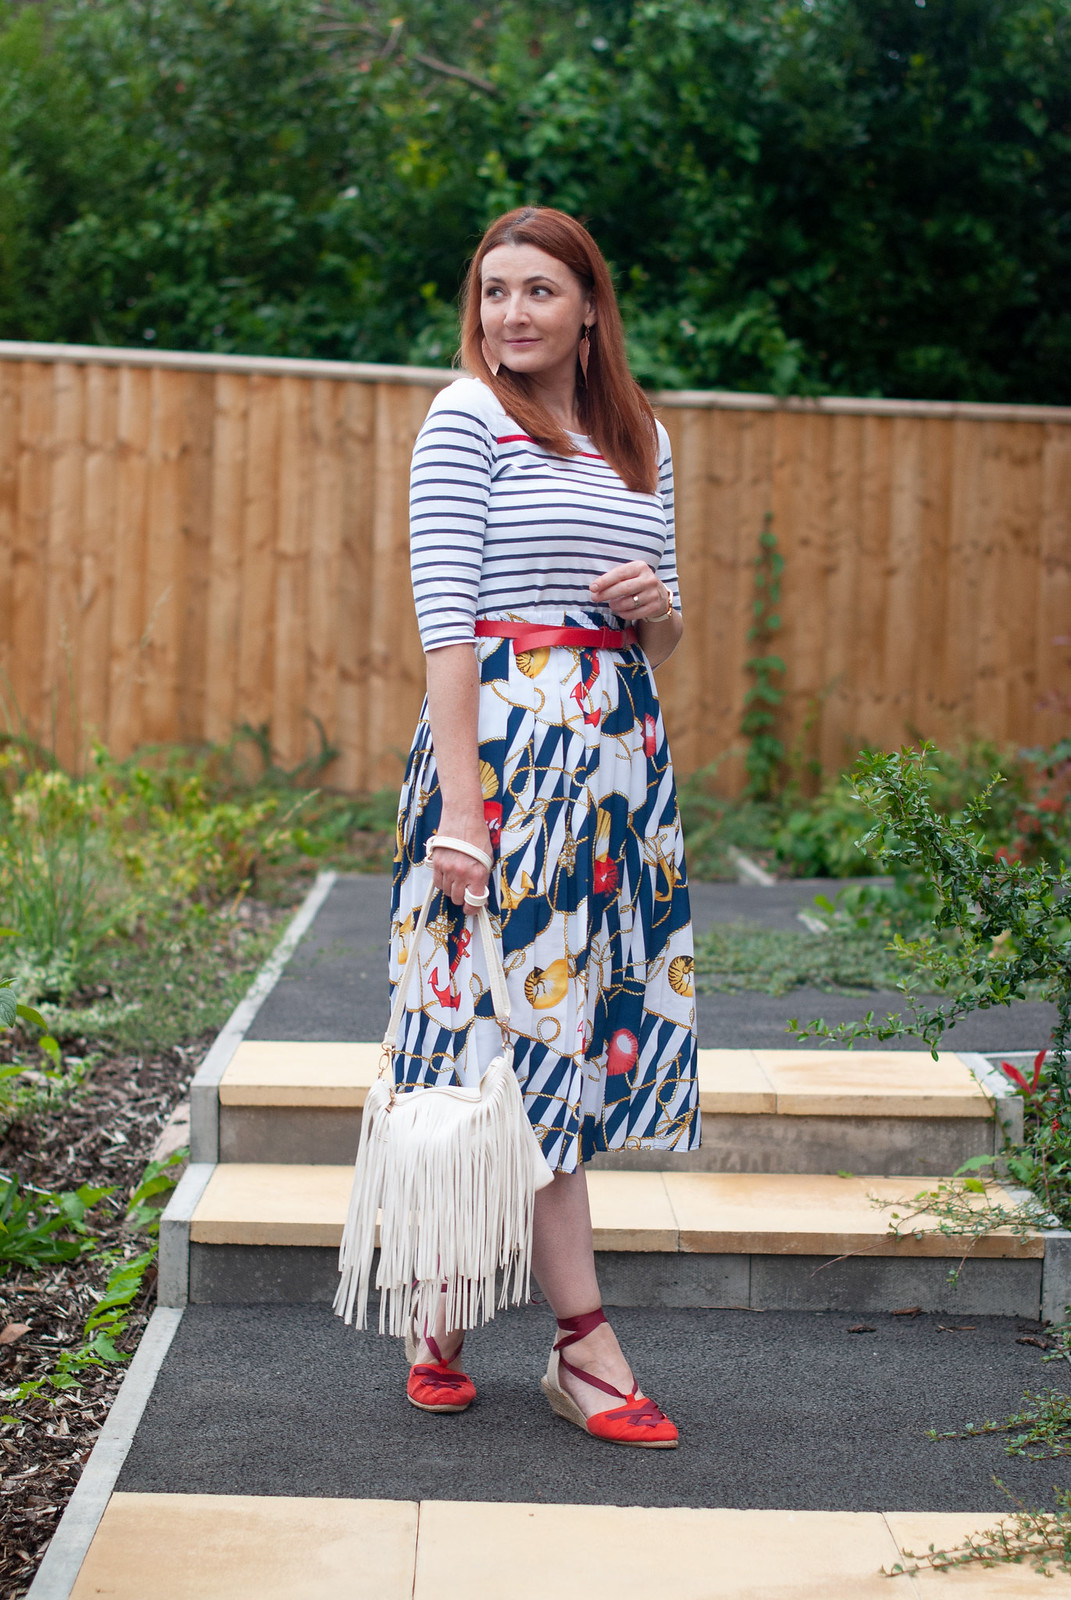 How to Wear a Vintage Nautical Look, Over 40 Style \ stripe Breton top \ vintage nautical print pleated midi skirt \ red espadrilles \ white fringe bag | Not Dressed As Lamb, over 40 fashion